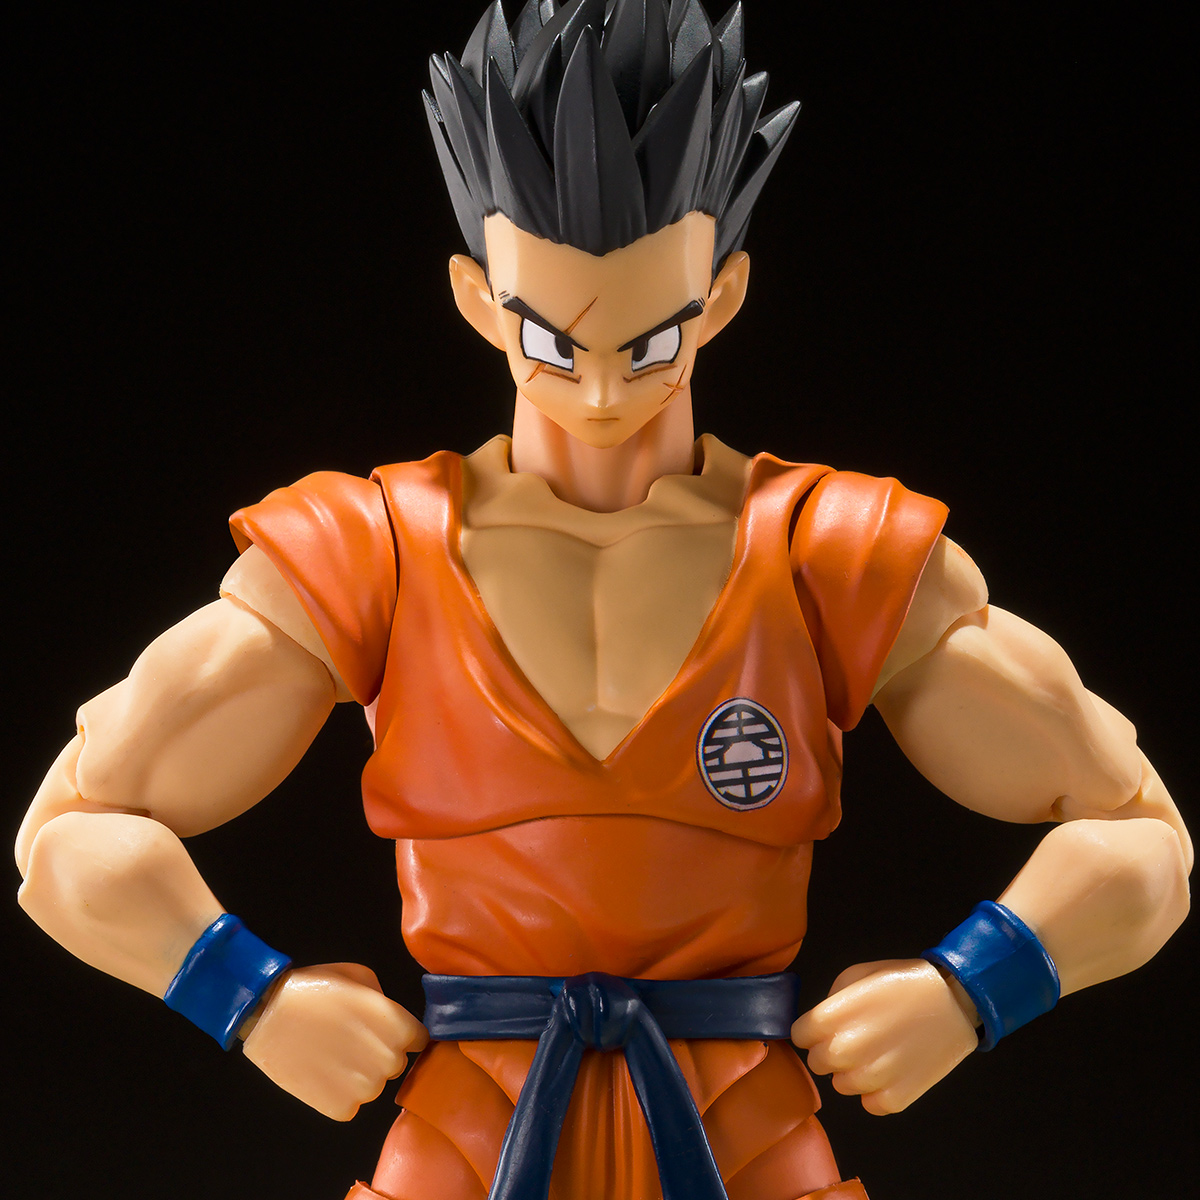 Morgue Escalera Deseo S.H.Figuarts YAMCHA -EARTH'S FOREMOST FIGHTER- | DRAGON BALL | PREMIUM  BANDAI USA Online Store for Action Figures, Model Kits, Toys and more